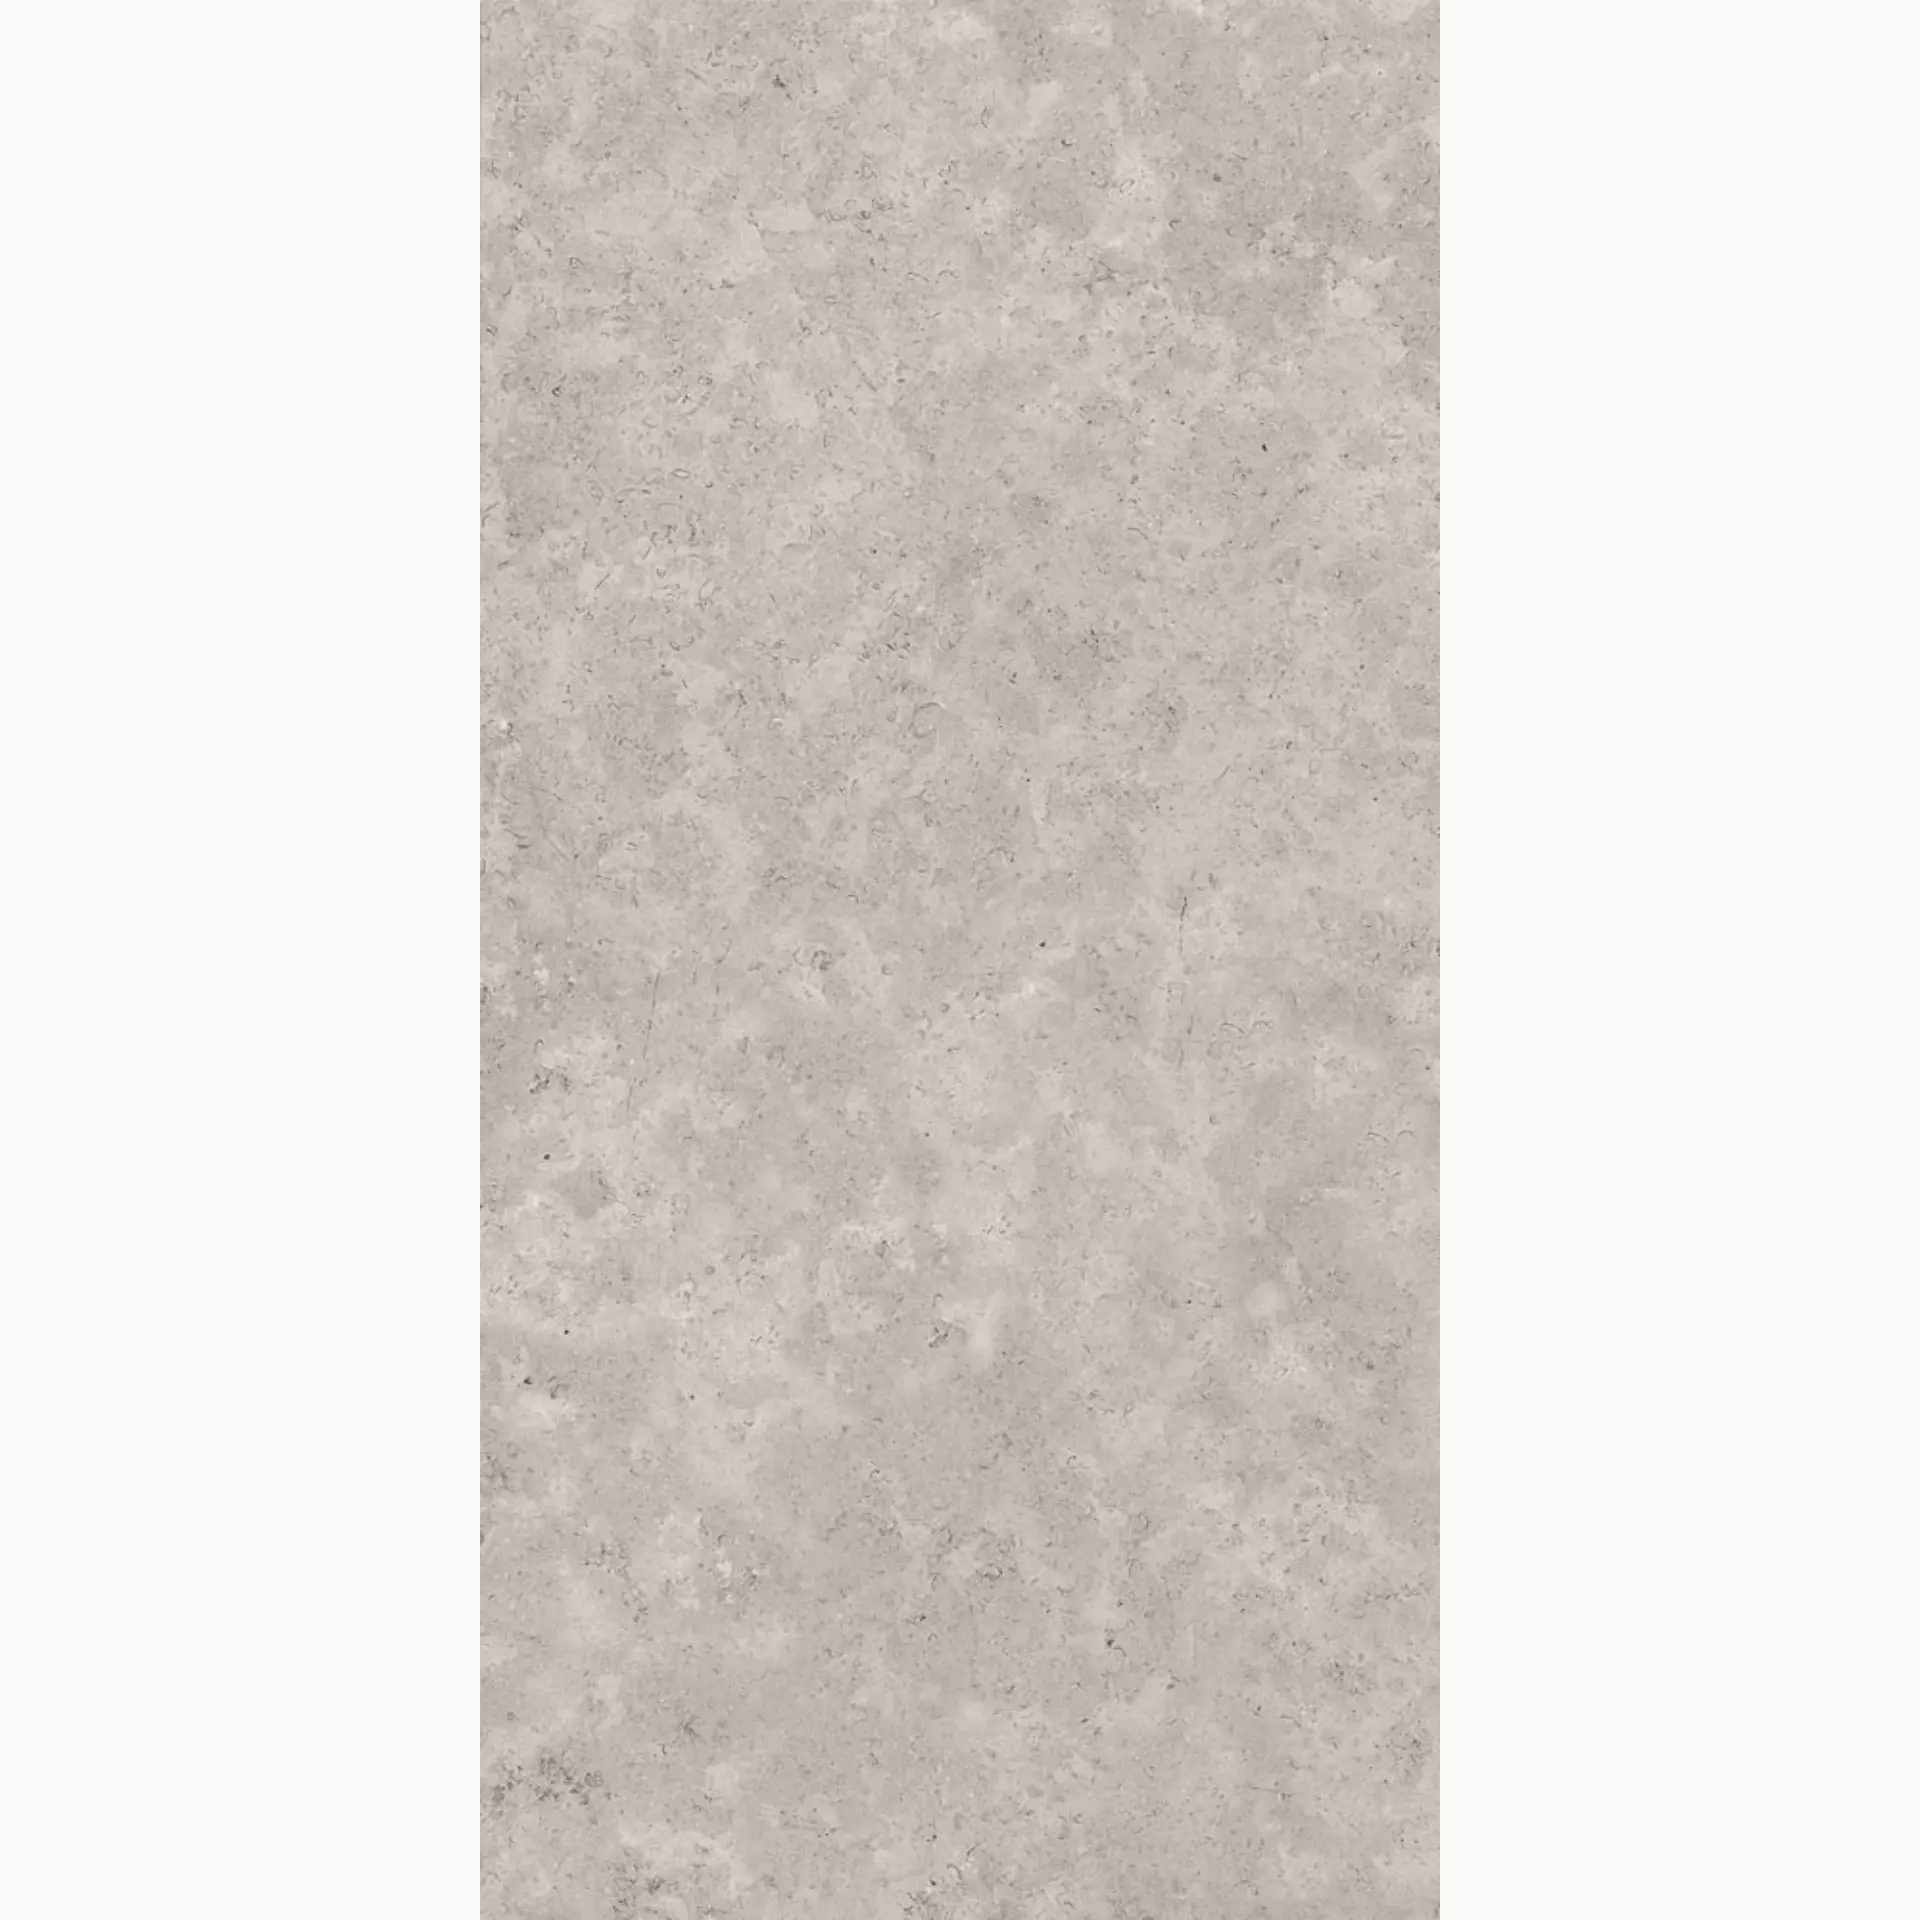 Sant Agostino Unionstone 2 Cedre Grey Natural CSACEDGR60 60x120cm rectified 10mm